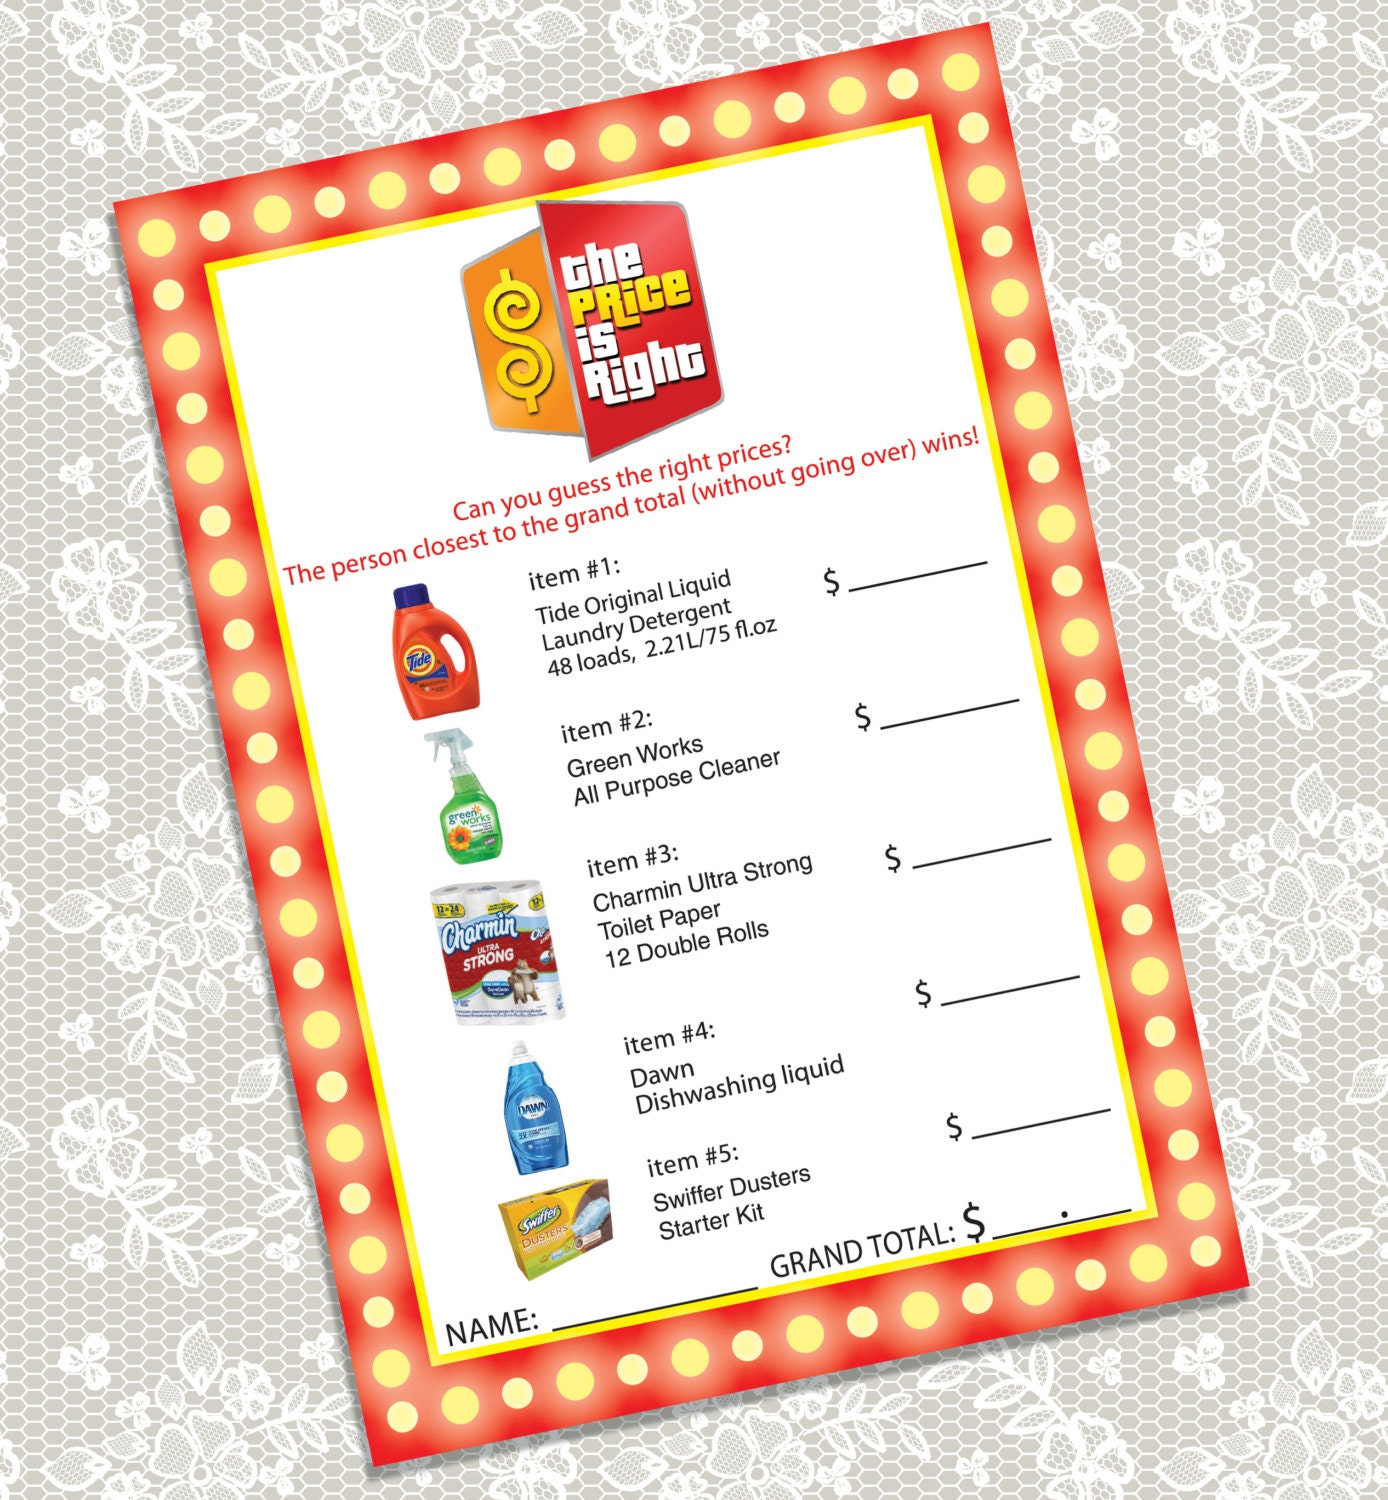 Printable 'The Price is Right' Bridal Shower game